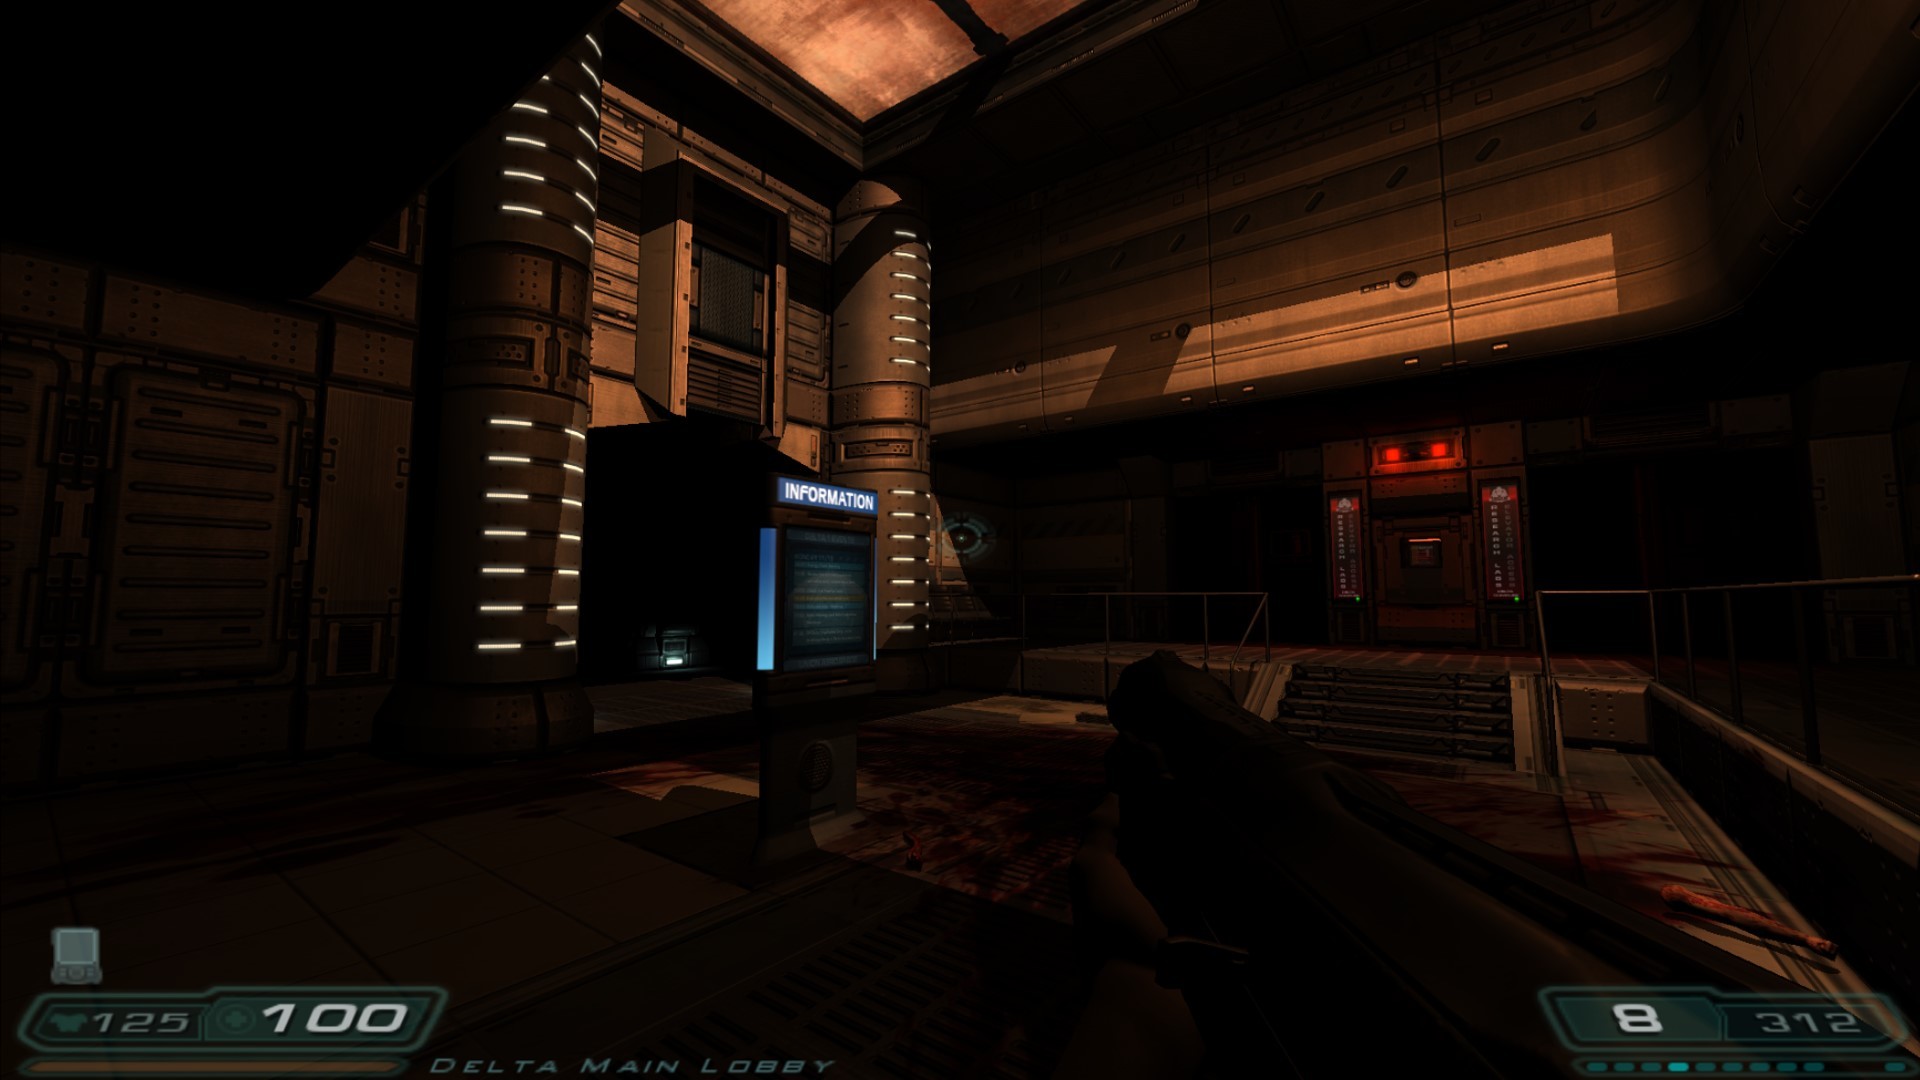 1920x1080 Doom 3, while not great, is a fun, dark and shadowy throwback shooter.